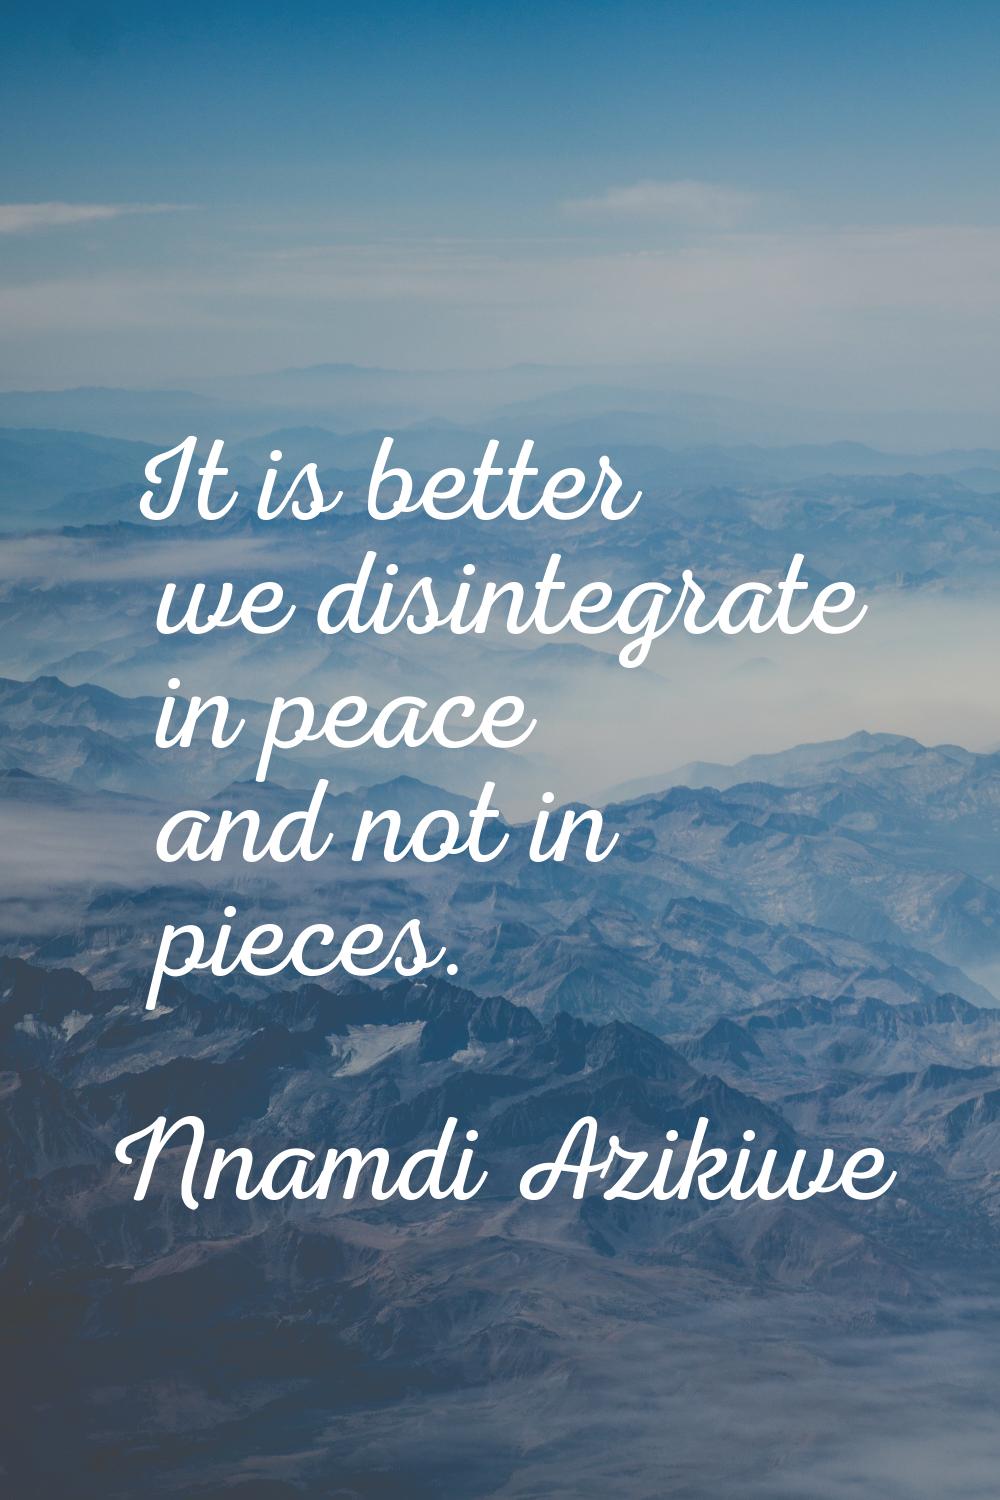 It is better we disintegrate in peace and not in pieces.